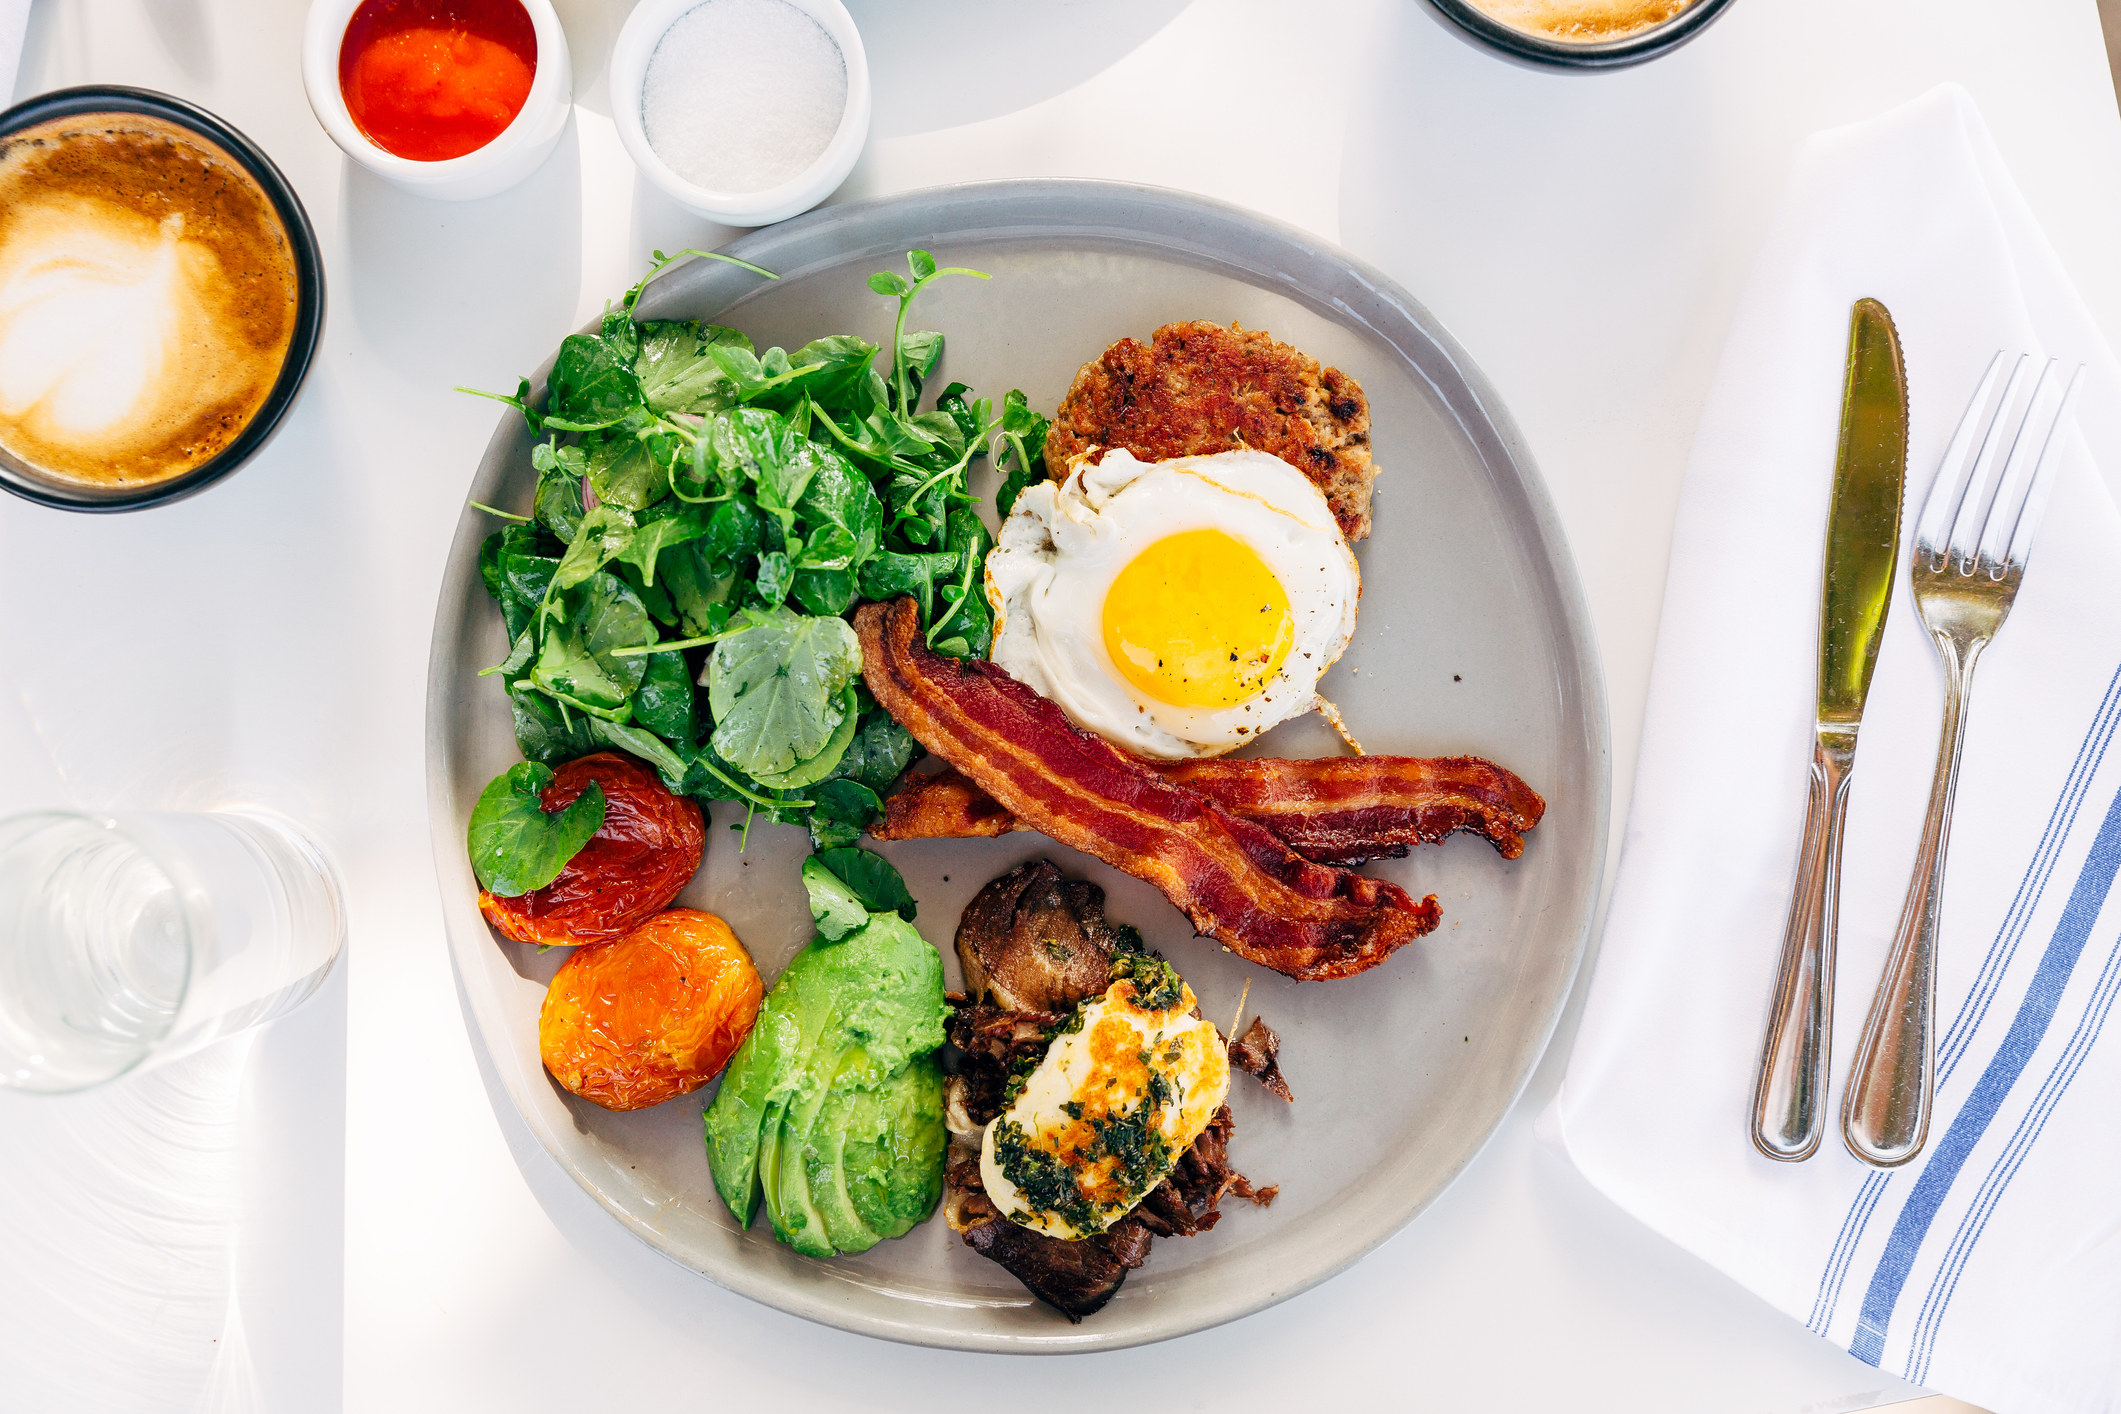 A plate of food including bacon, egg, and avocado.